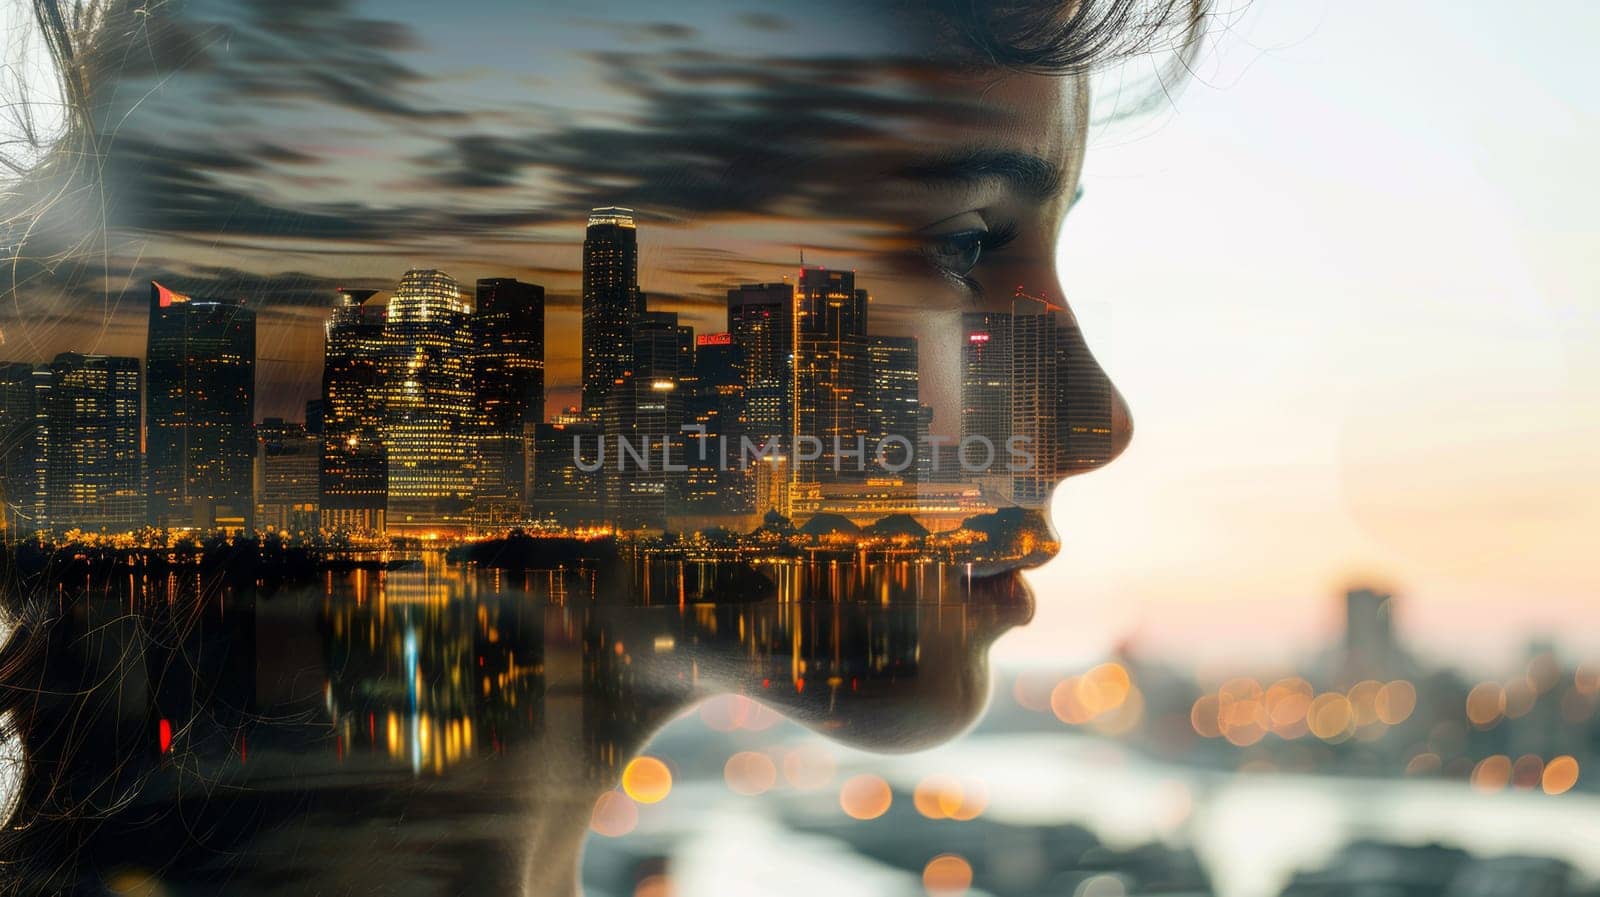 A double exposure of a woman's face with city lights in the background